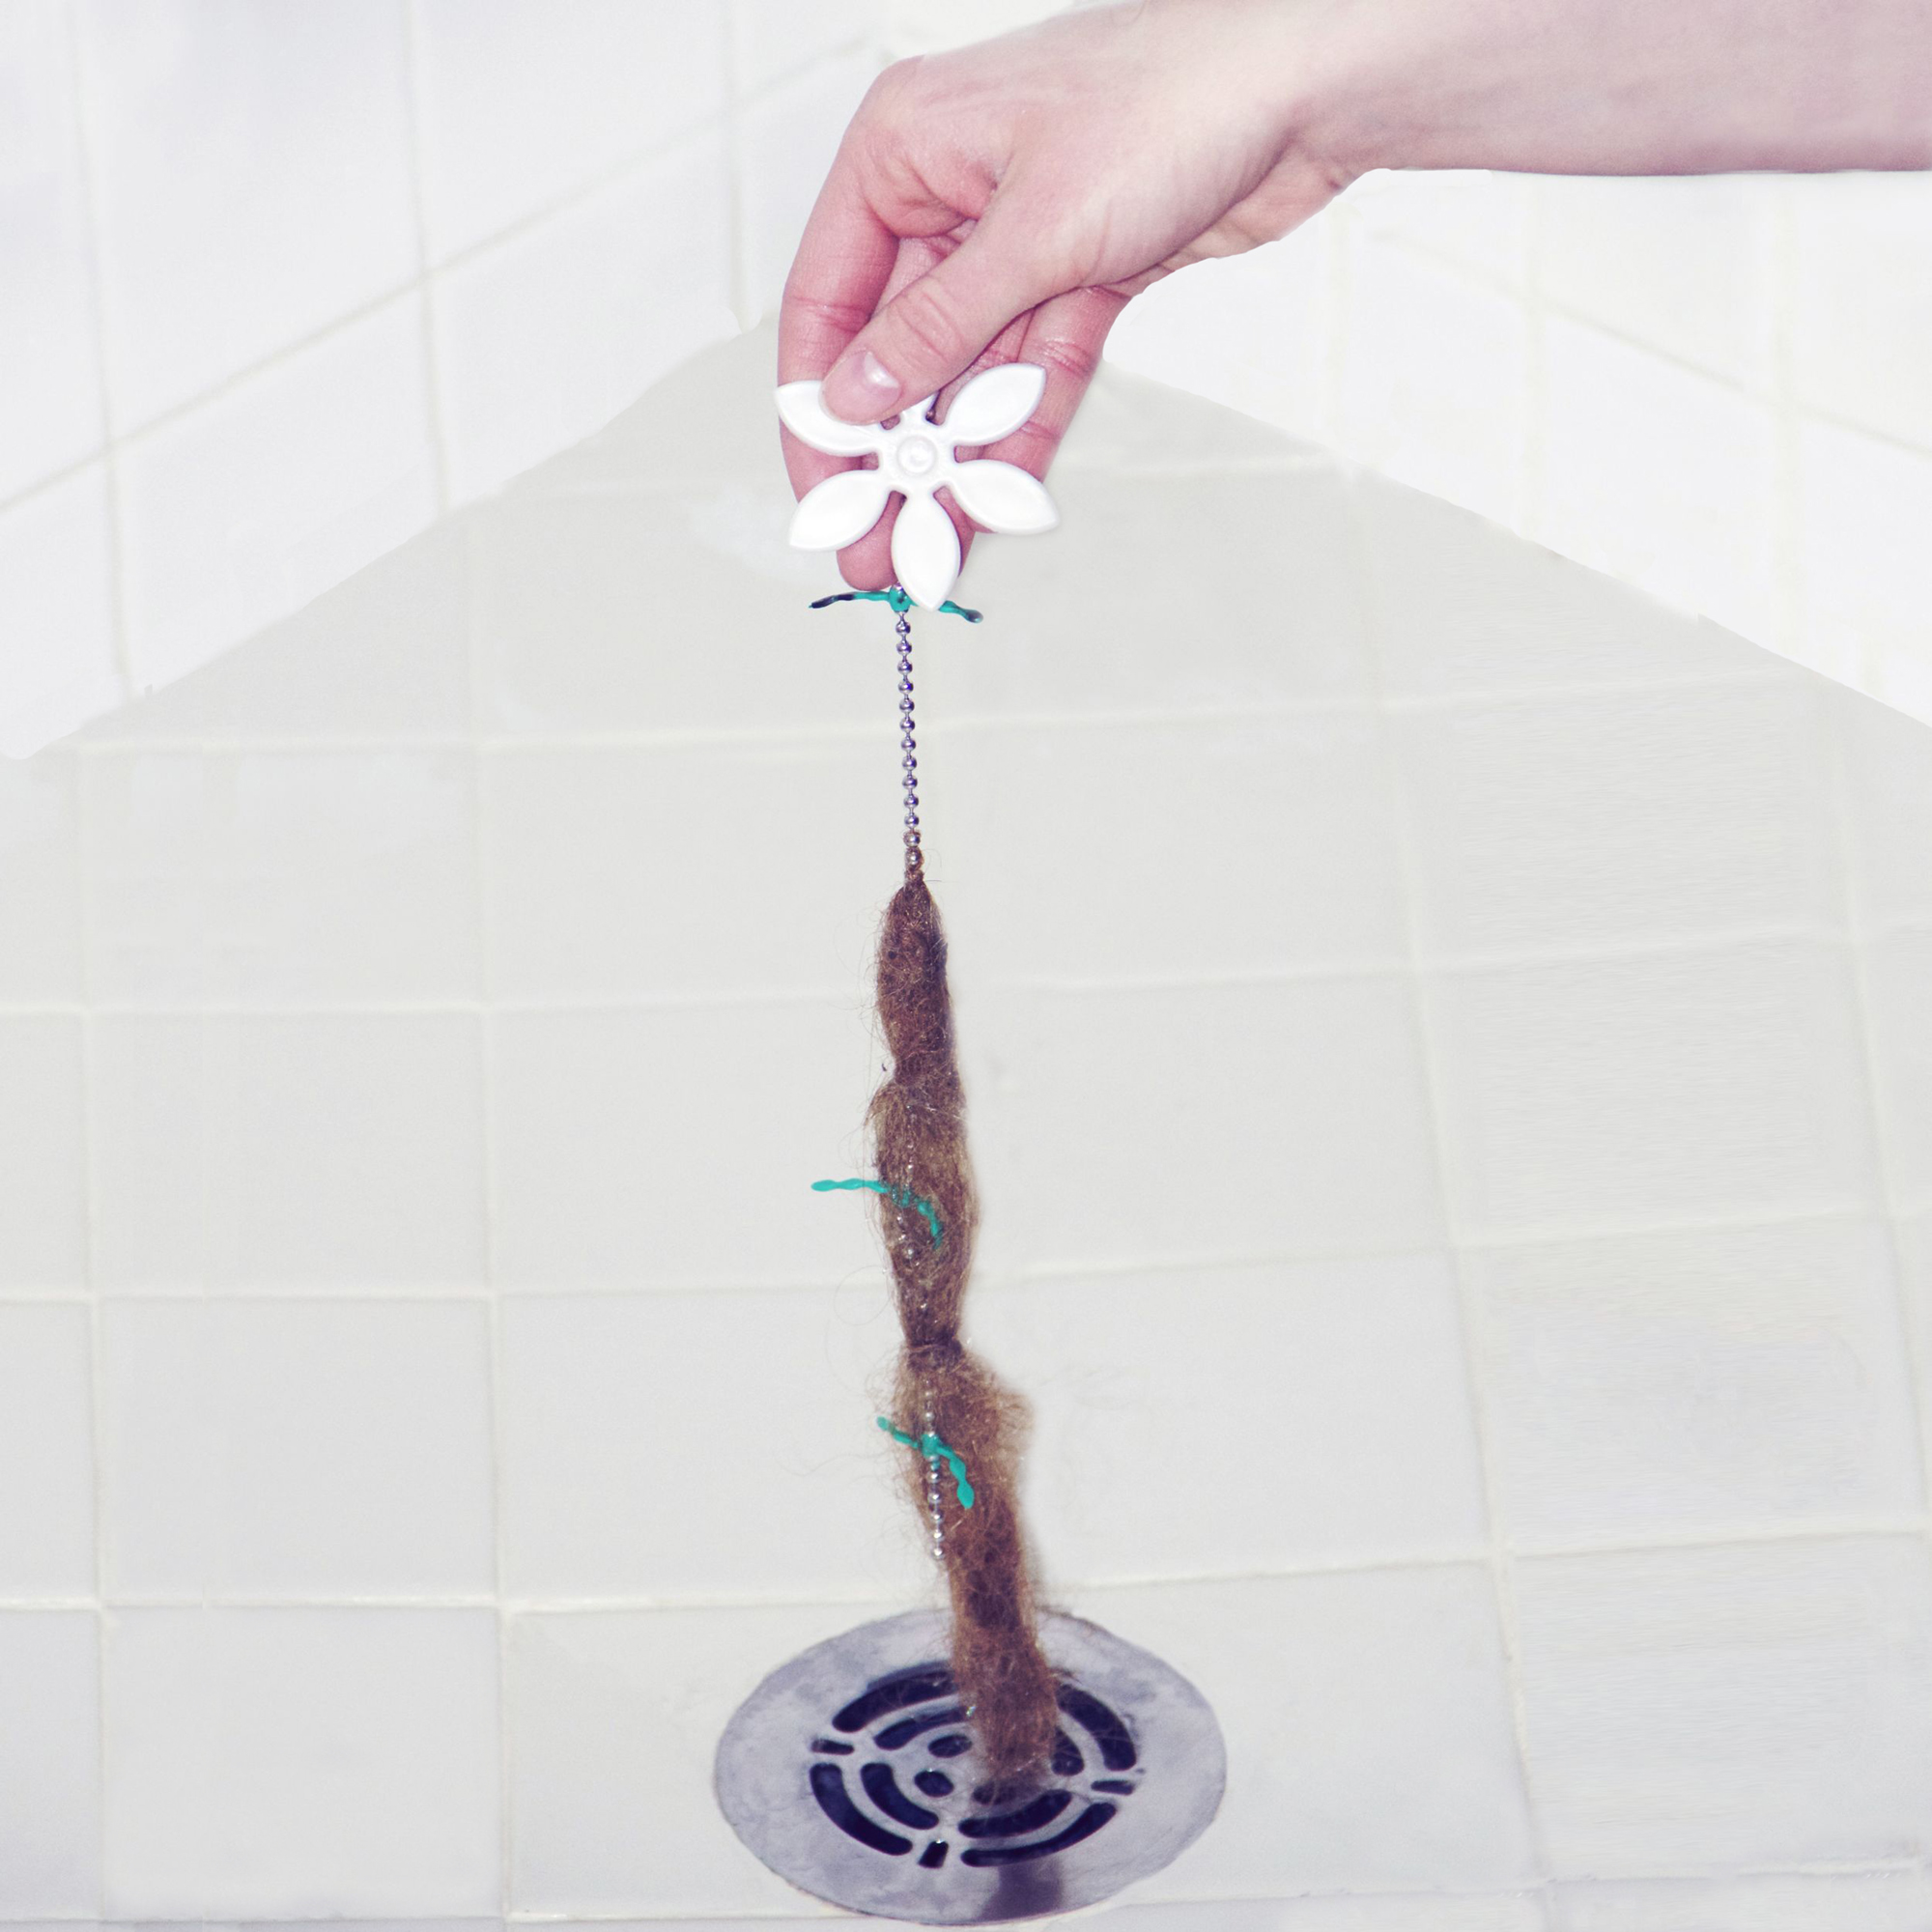 DrainWig eliminates the task of pulling wet, clogged hair out of the drain by hand.